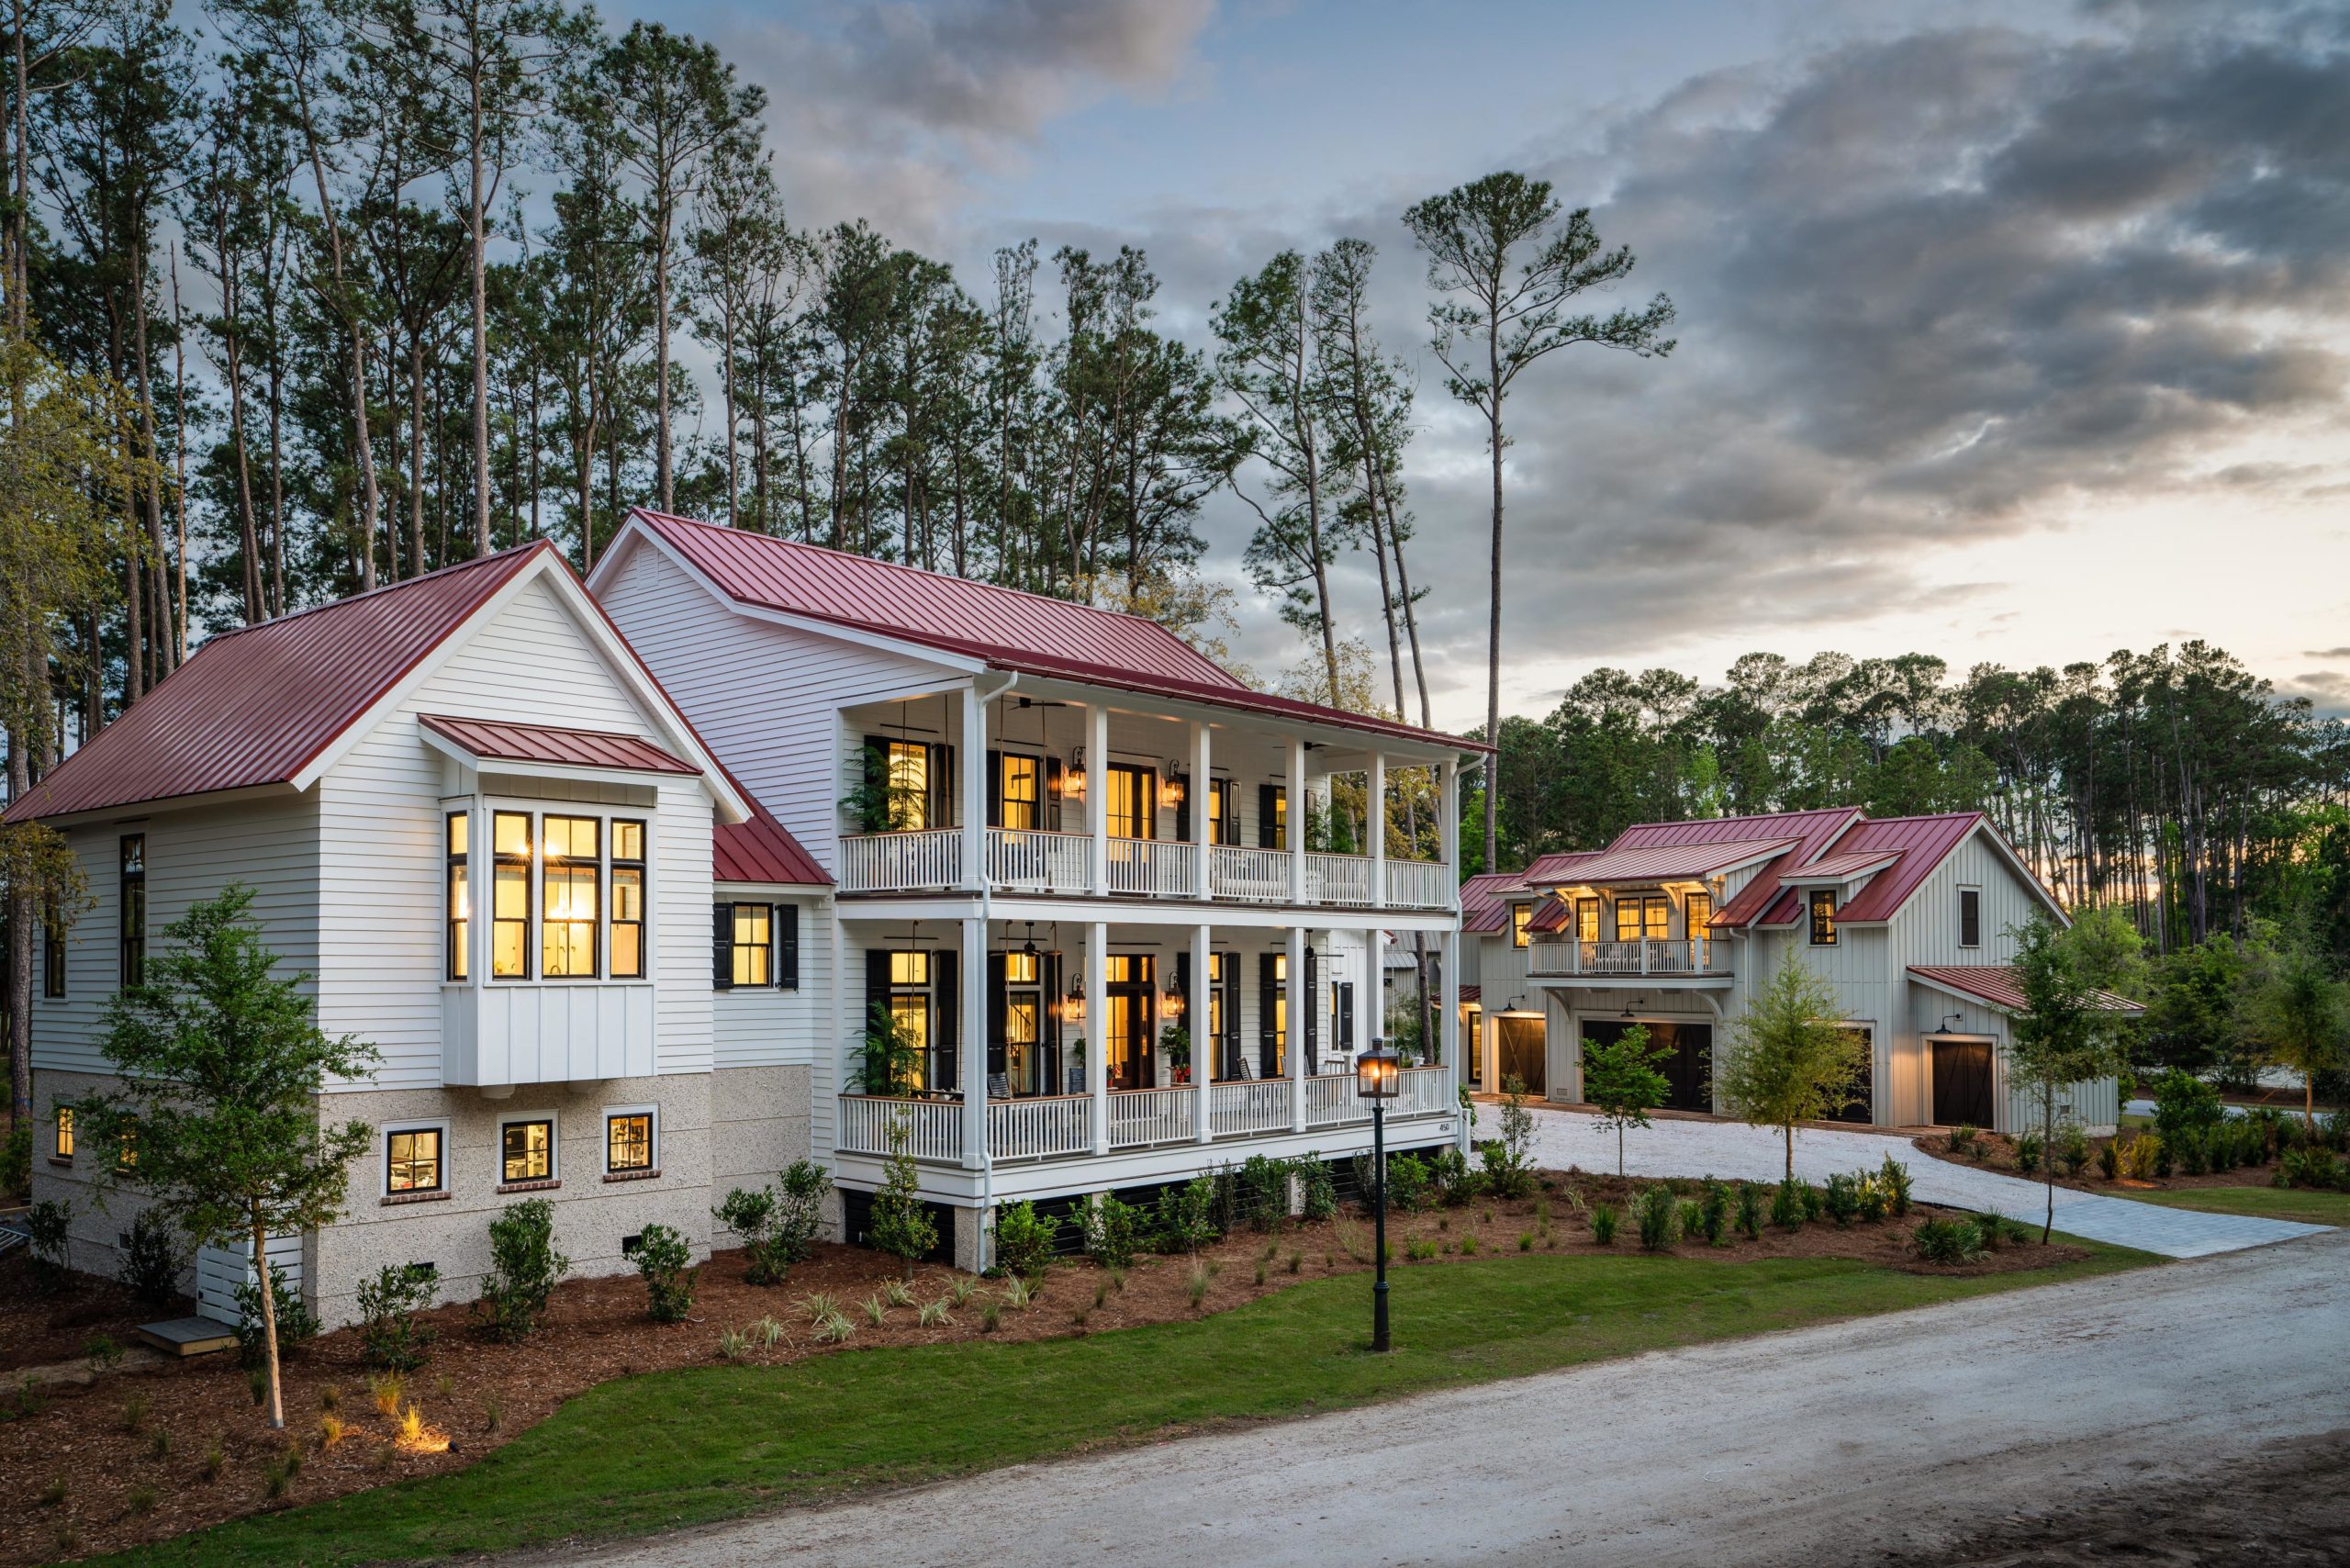 Exterior view of The May River House and Carriage House at Palmetto Bluff SC